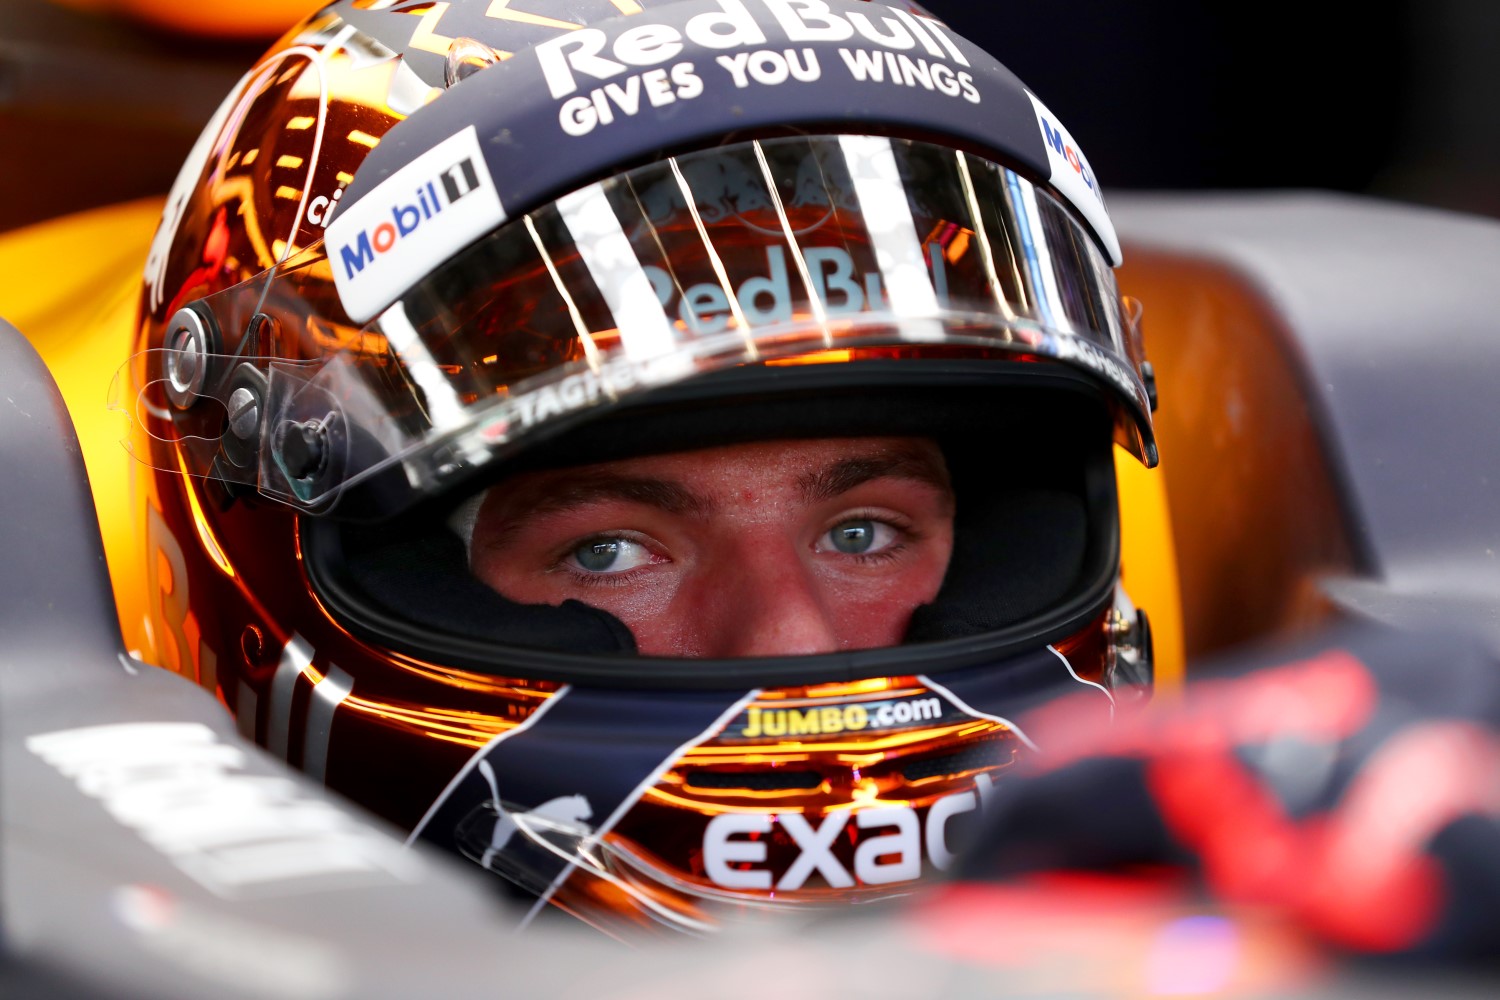 Is Max Verstappen too hard on his equipment? His teammate doesn't break them.